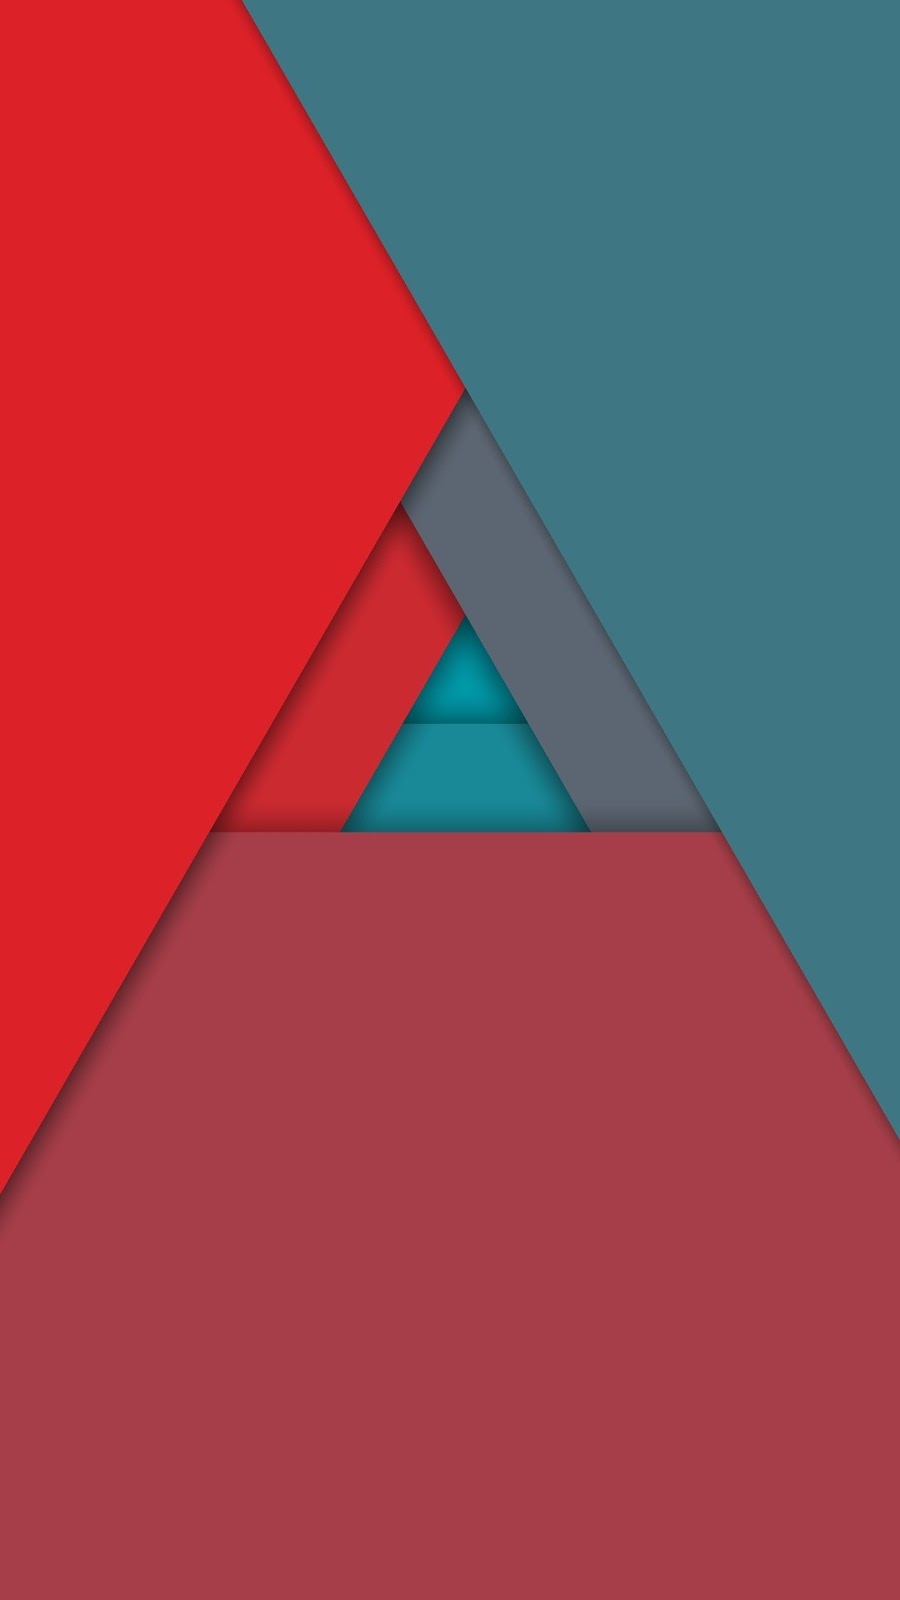 Android Background Material Design - HD Wallpaper 